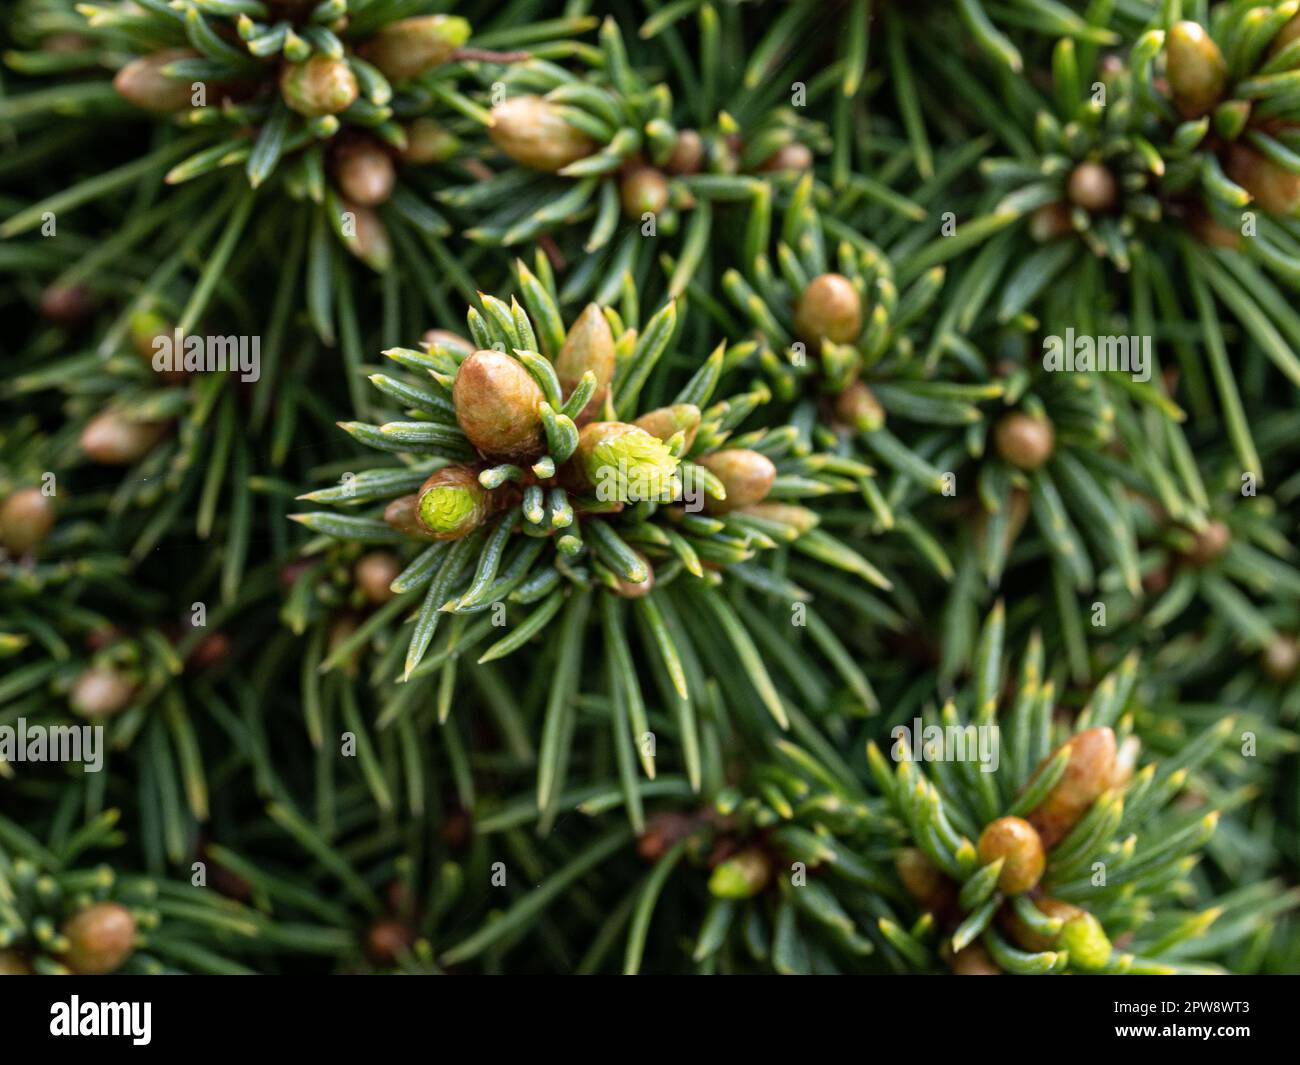 A close up of a bursting new growth bud on the dwarf conifer Picea glauca var albertiana 'Lilliput' Stock Photo